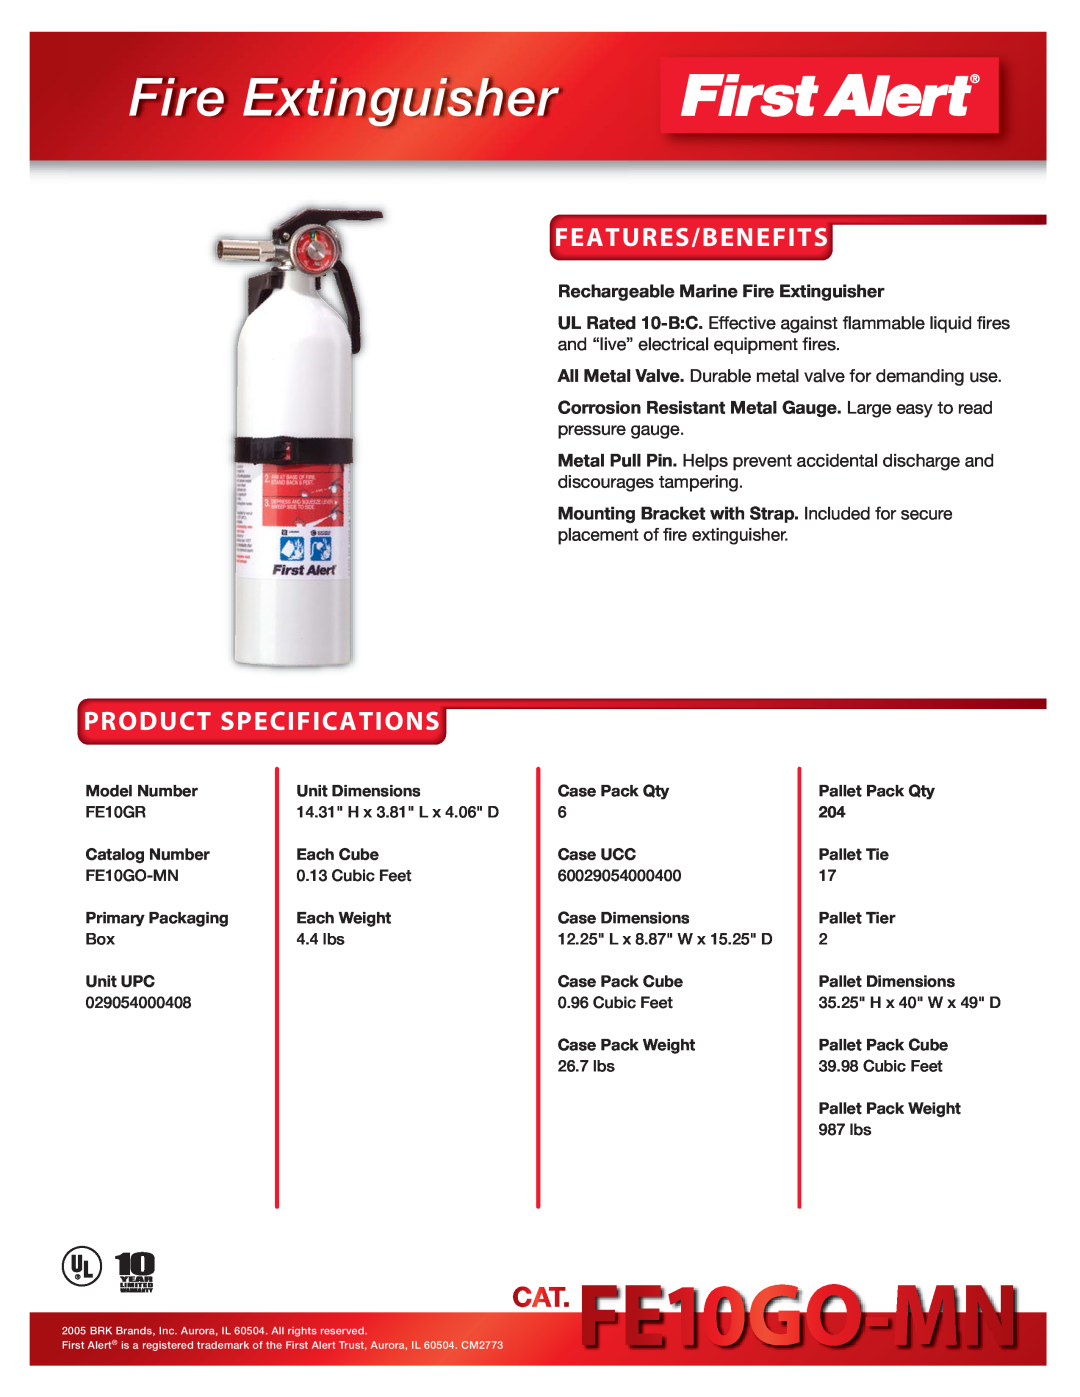 BRK electronic FE10GO-MN specifications Fire Extinguisher, Features/Benefits, Product Specifications 